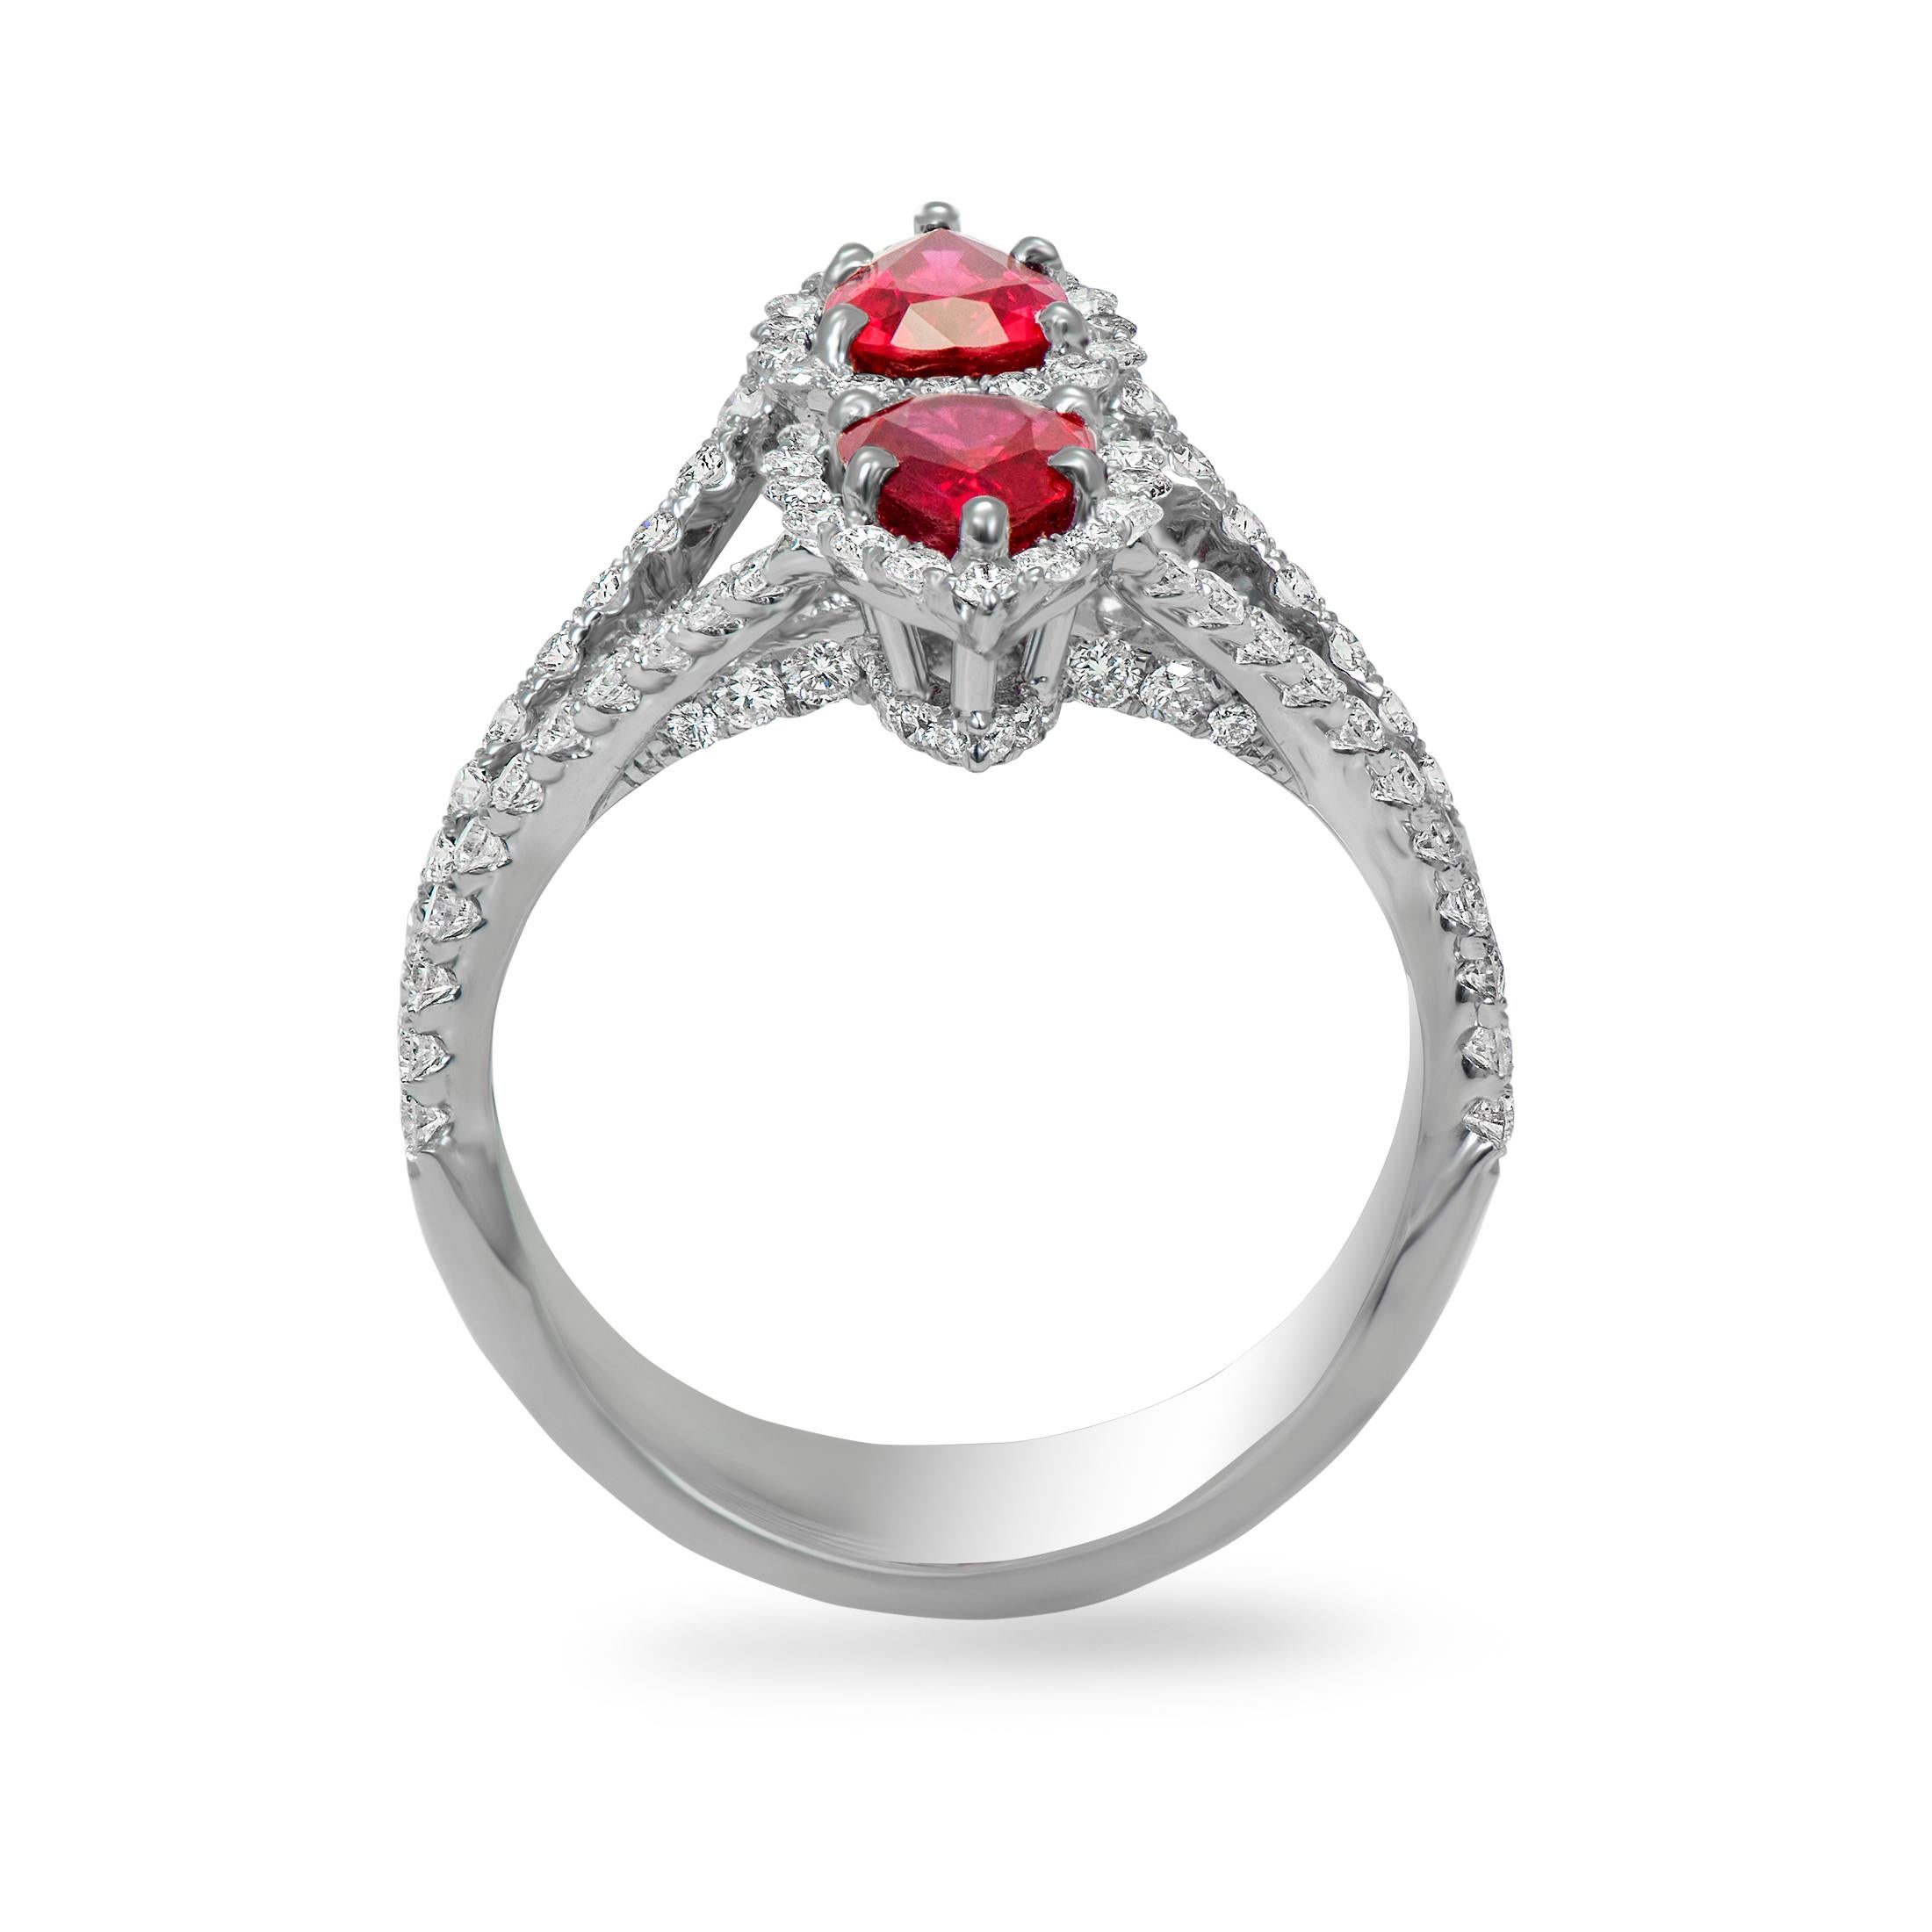 18 Karat white gold ruby and diamond cocktail ring from Laviere's Carmine Collection. The ring is set with 1.4-carat Burmese ruby and 1.13-carat brilliant cut diamonds. 

Gross Weight of the ring:  6.15 grams. 
Diamonds Color/Clarity: G-H/VS-SI.